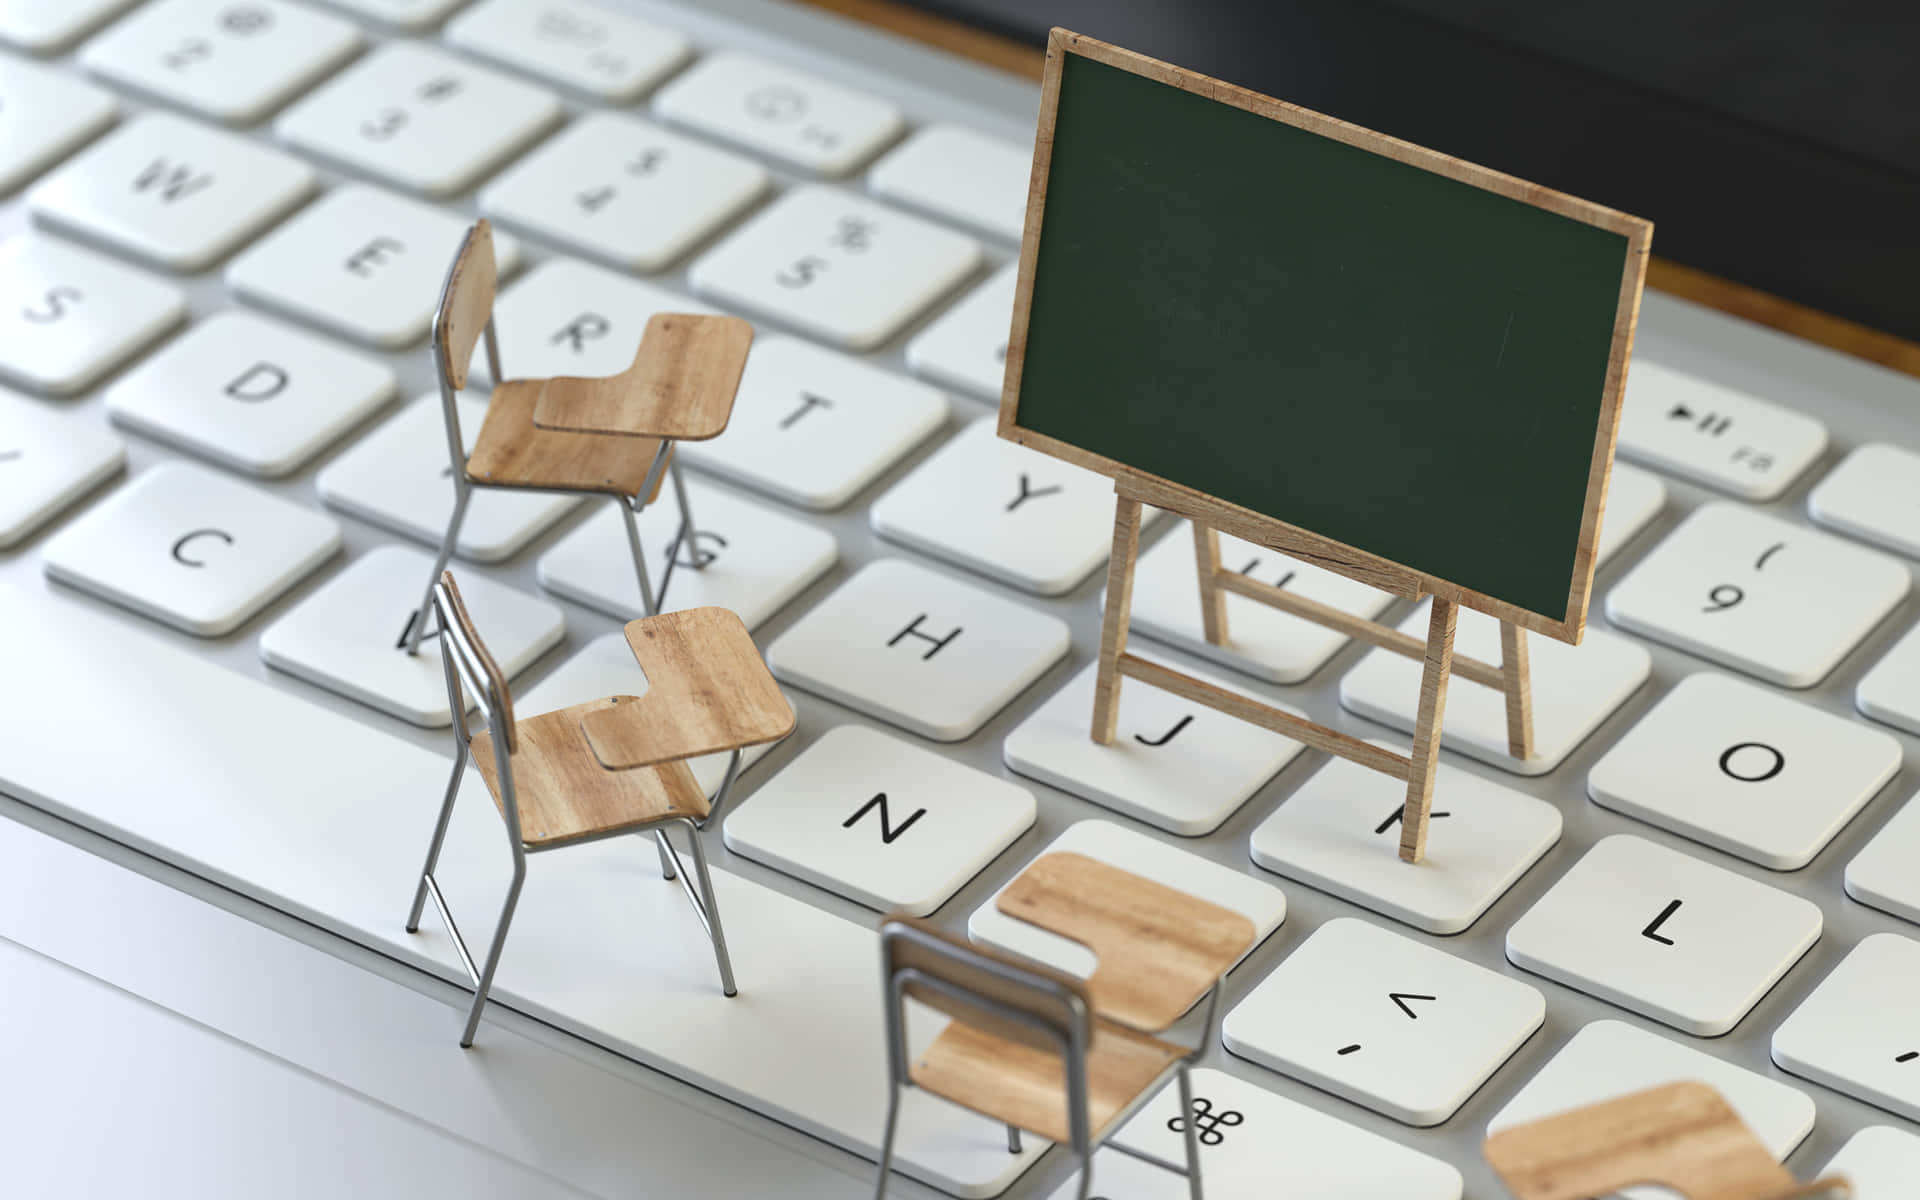 A Keyboard With Chairs And A Blackboard